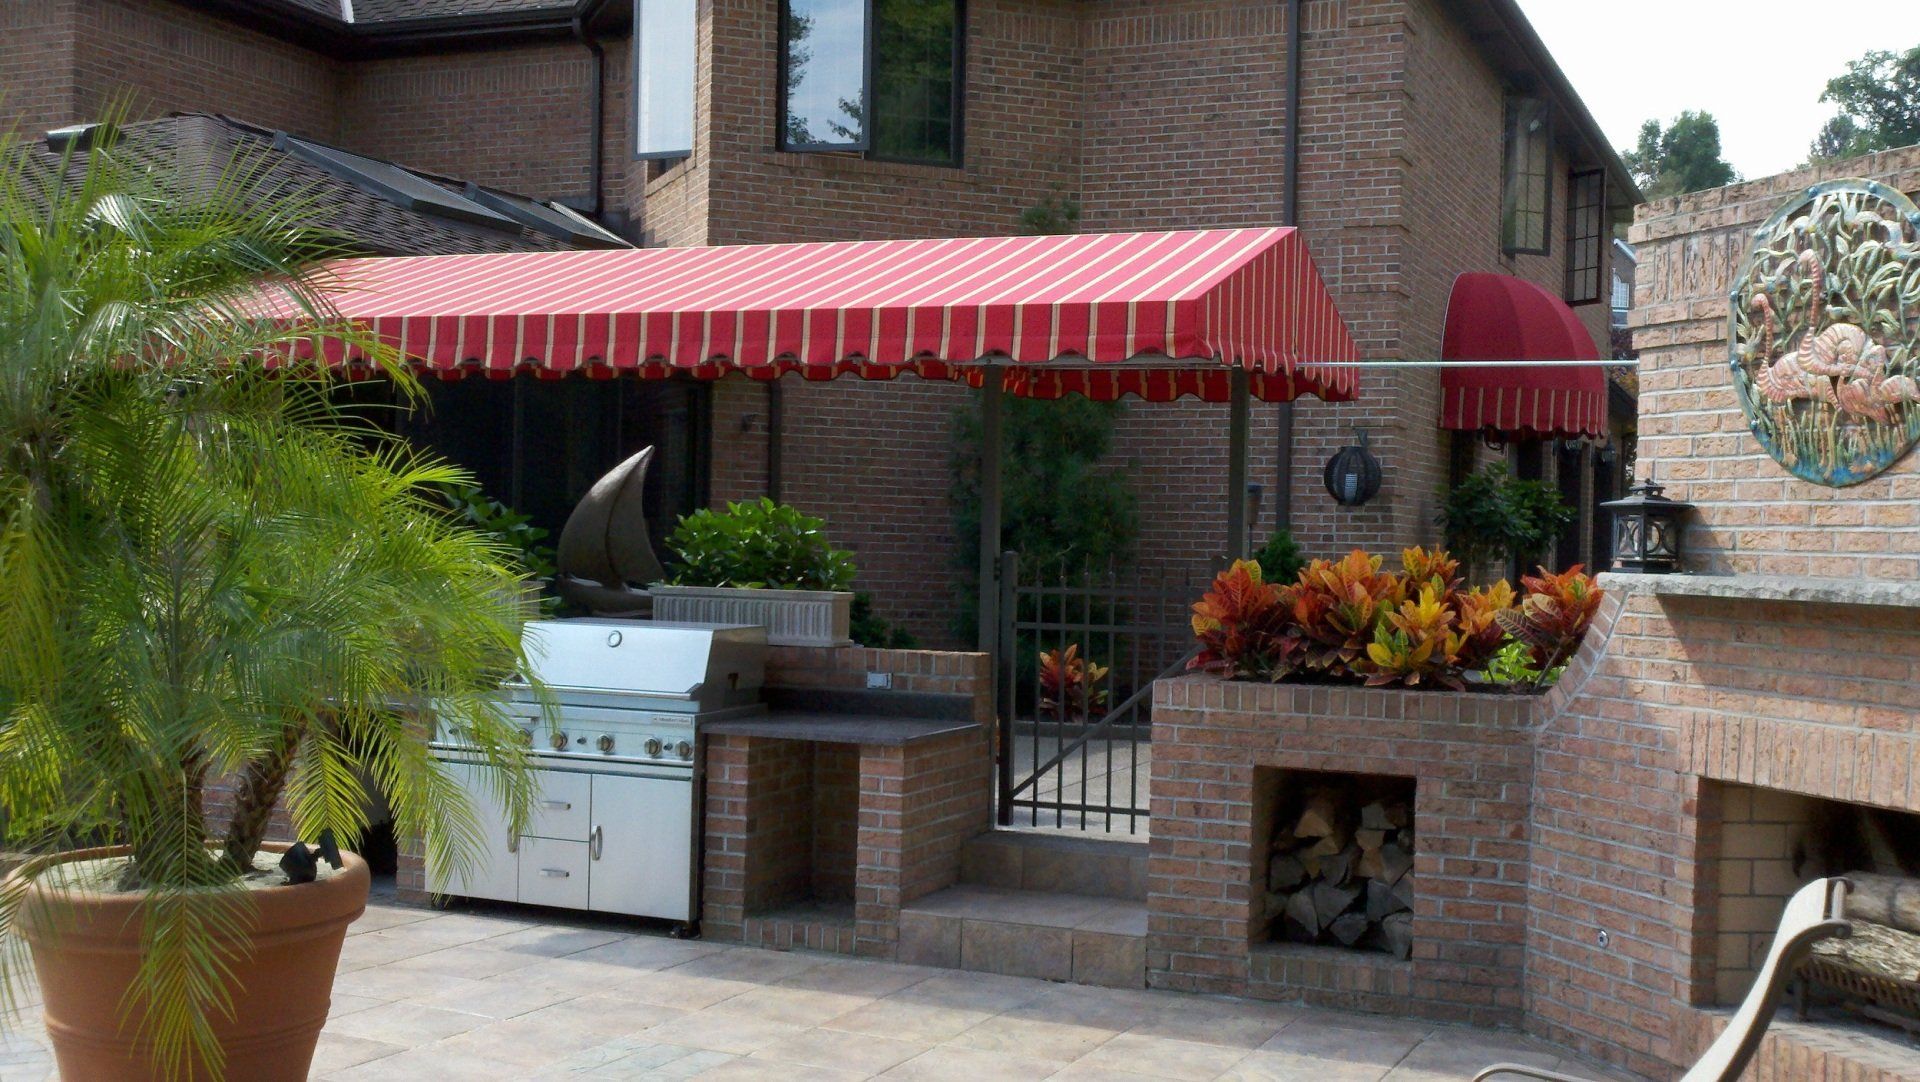 Residential awning-12 — Custom awnings in Pittsburgh, PA